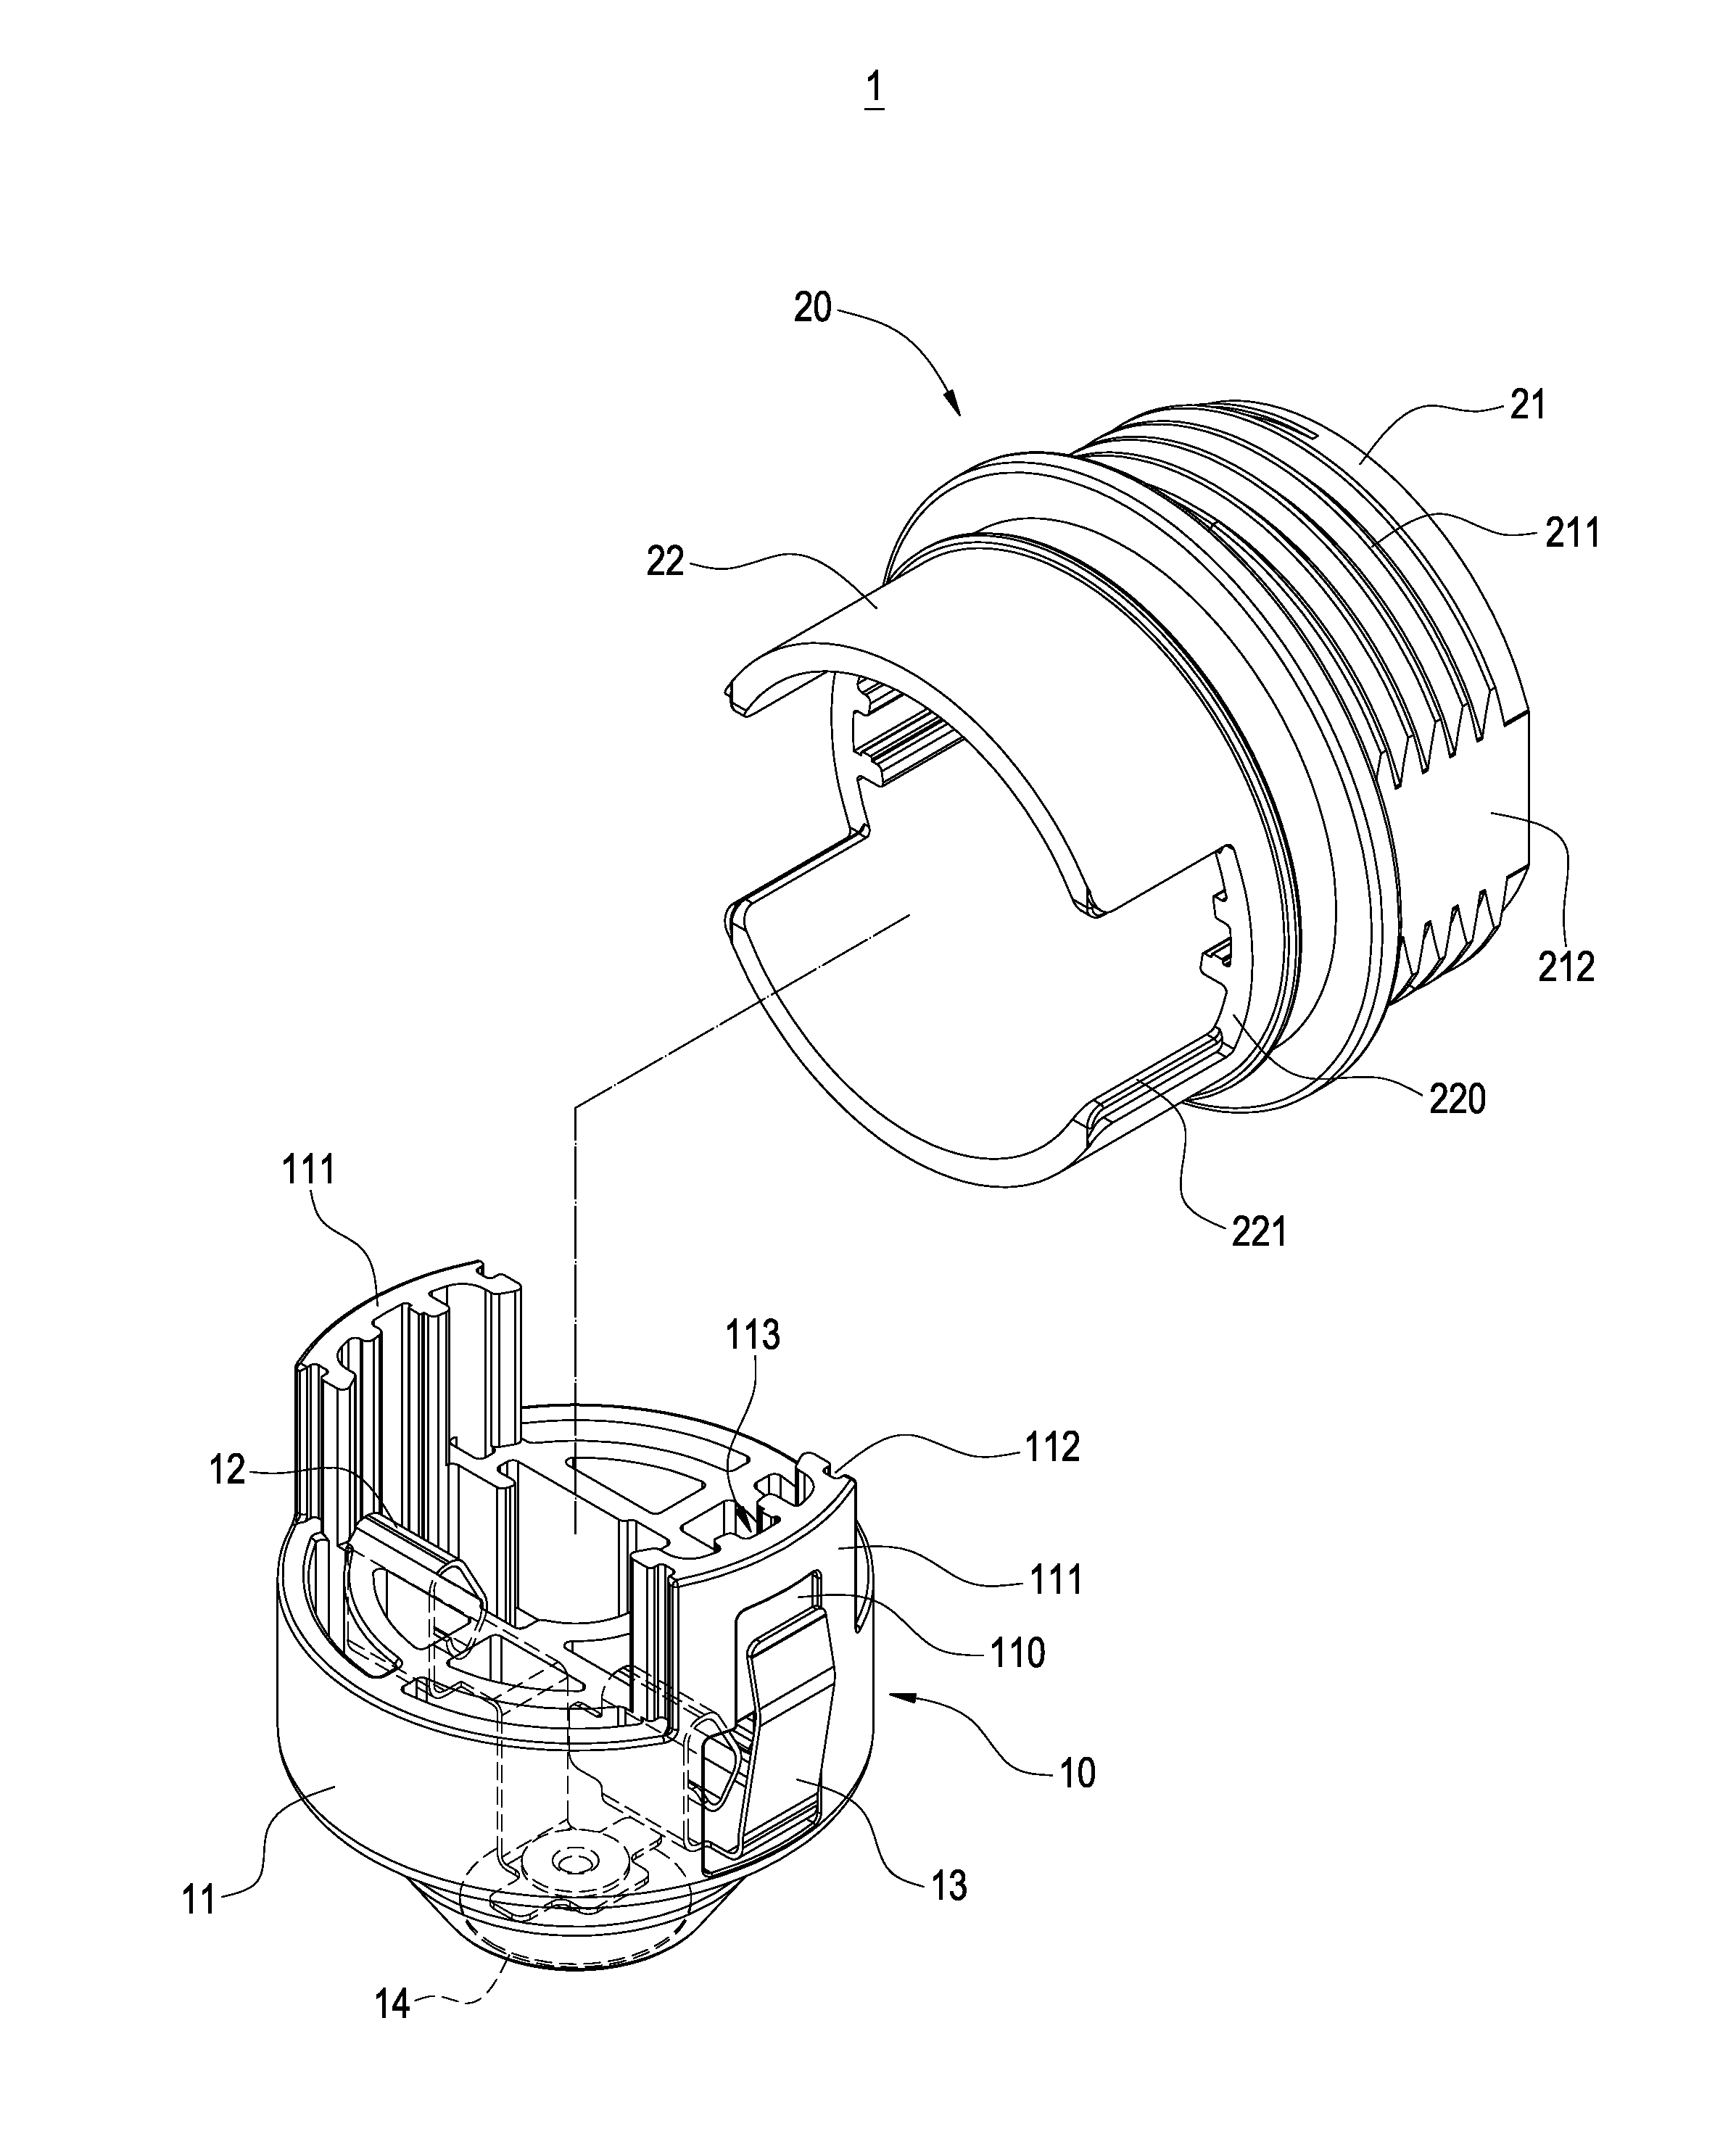 LED bulb and lamp head assembly with positioning structures